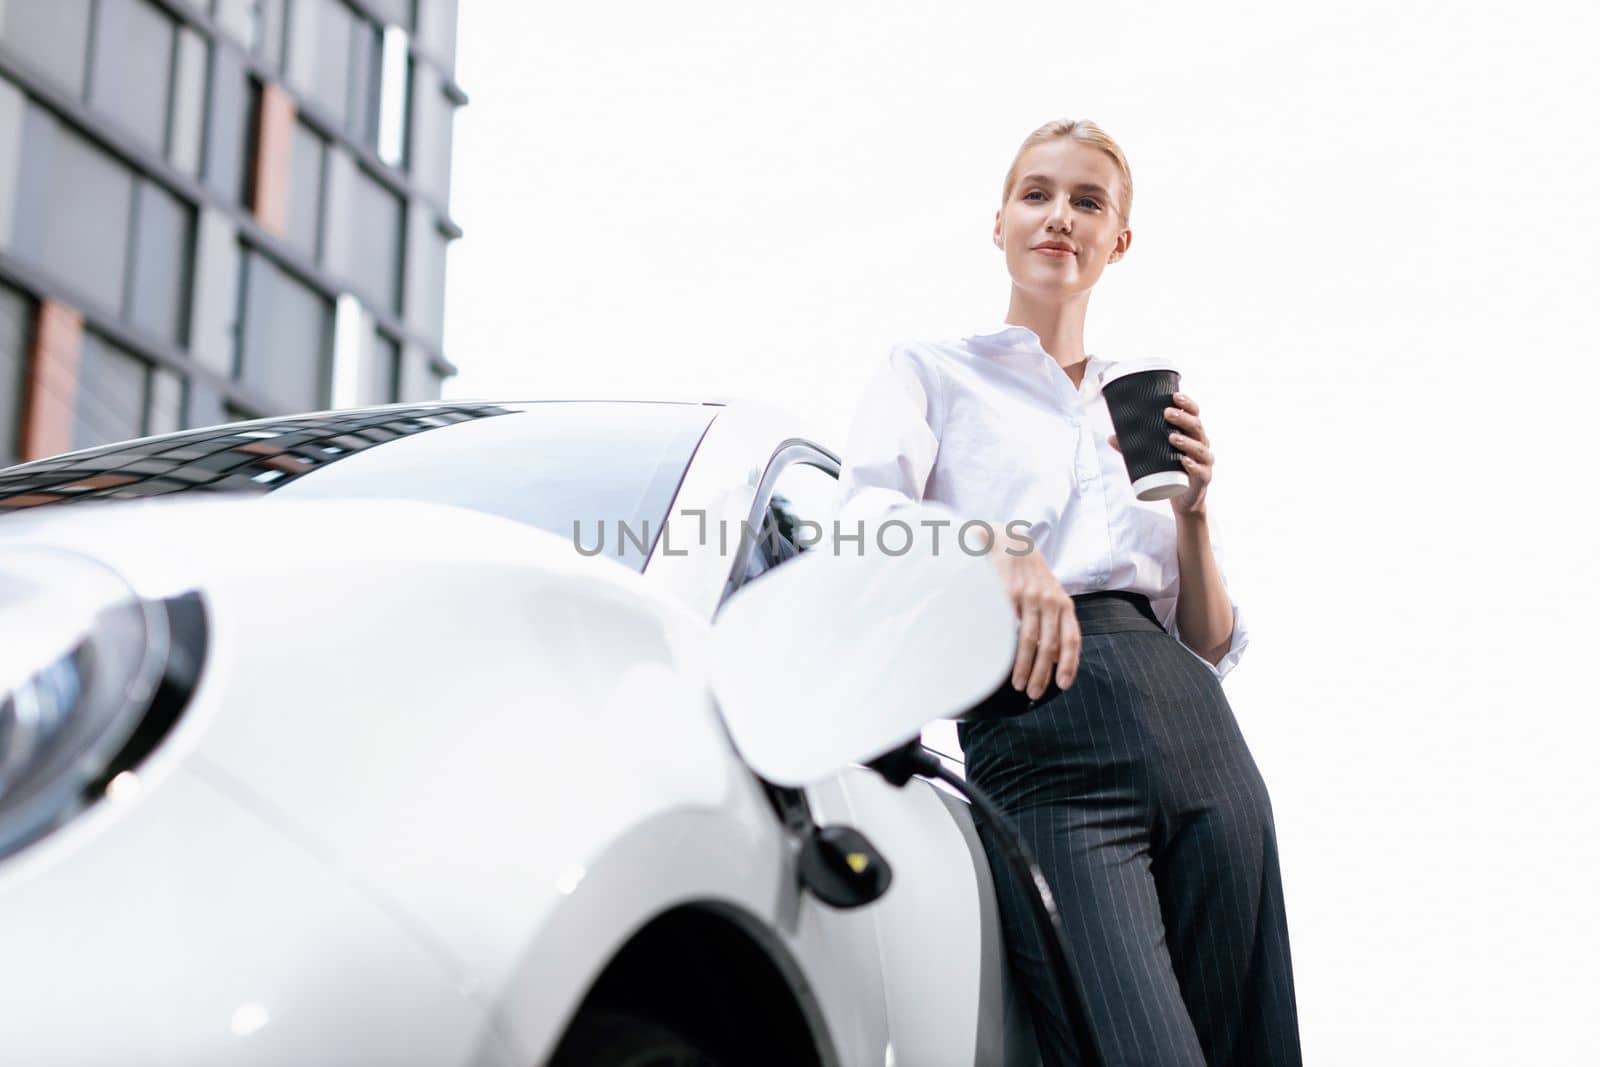 Businesswoman drinking coffee, leaning on electric vehicle recharging at public charging station with residential apartment condos building in background as progressive lifestyle by eco-friendly car.